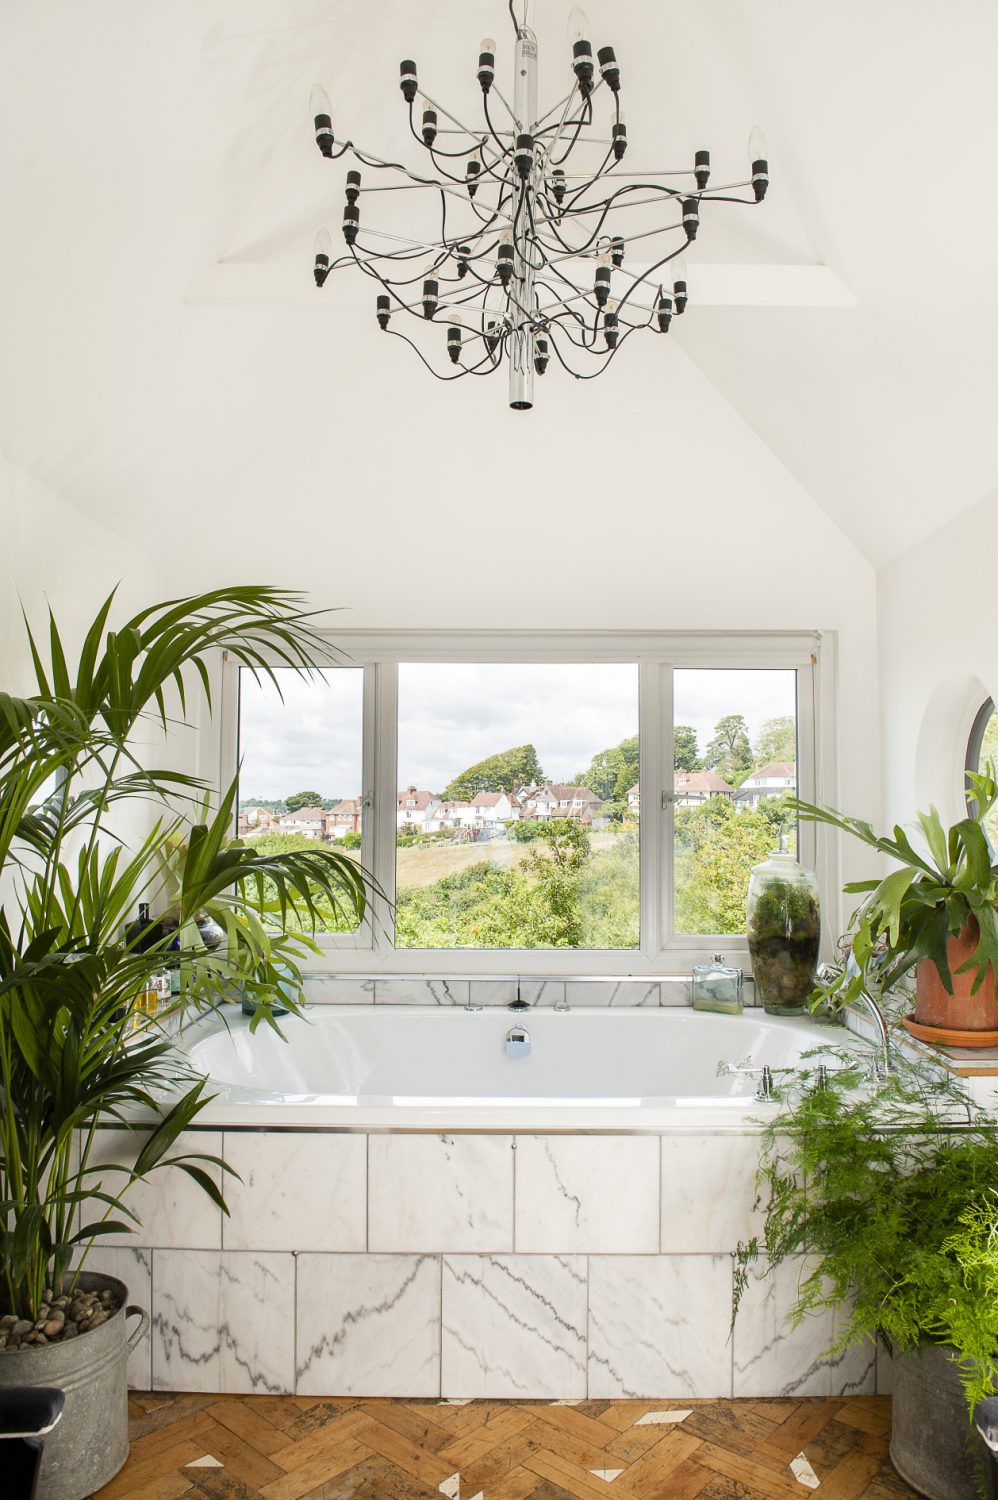 The plant-filled master bathroom has views over the Bourne valley. The chandelier is a 1958 design by Gino Sarfatti from Flos